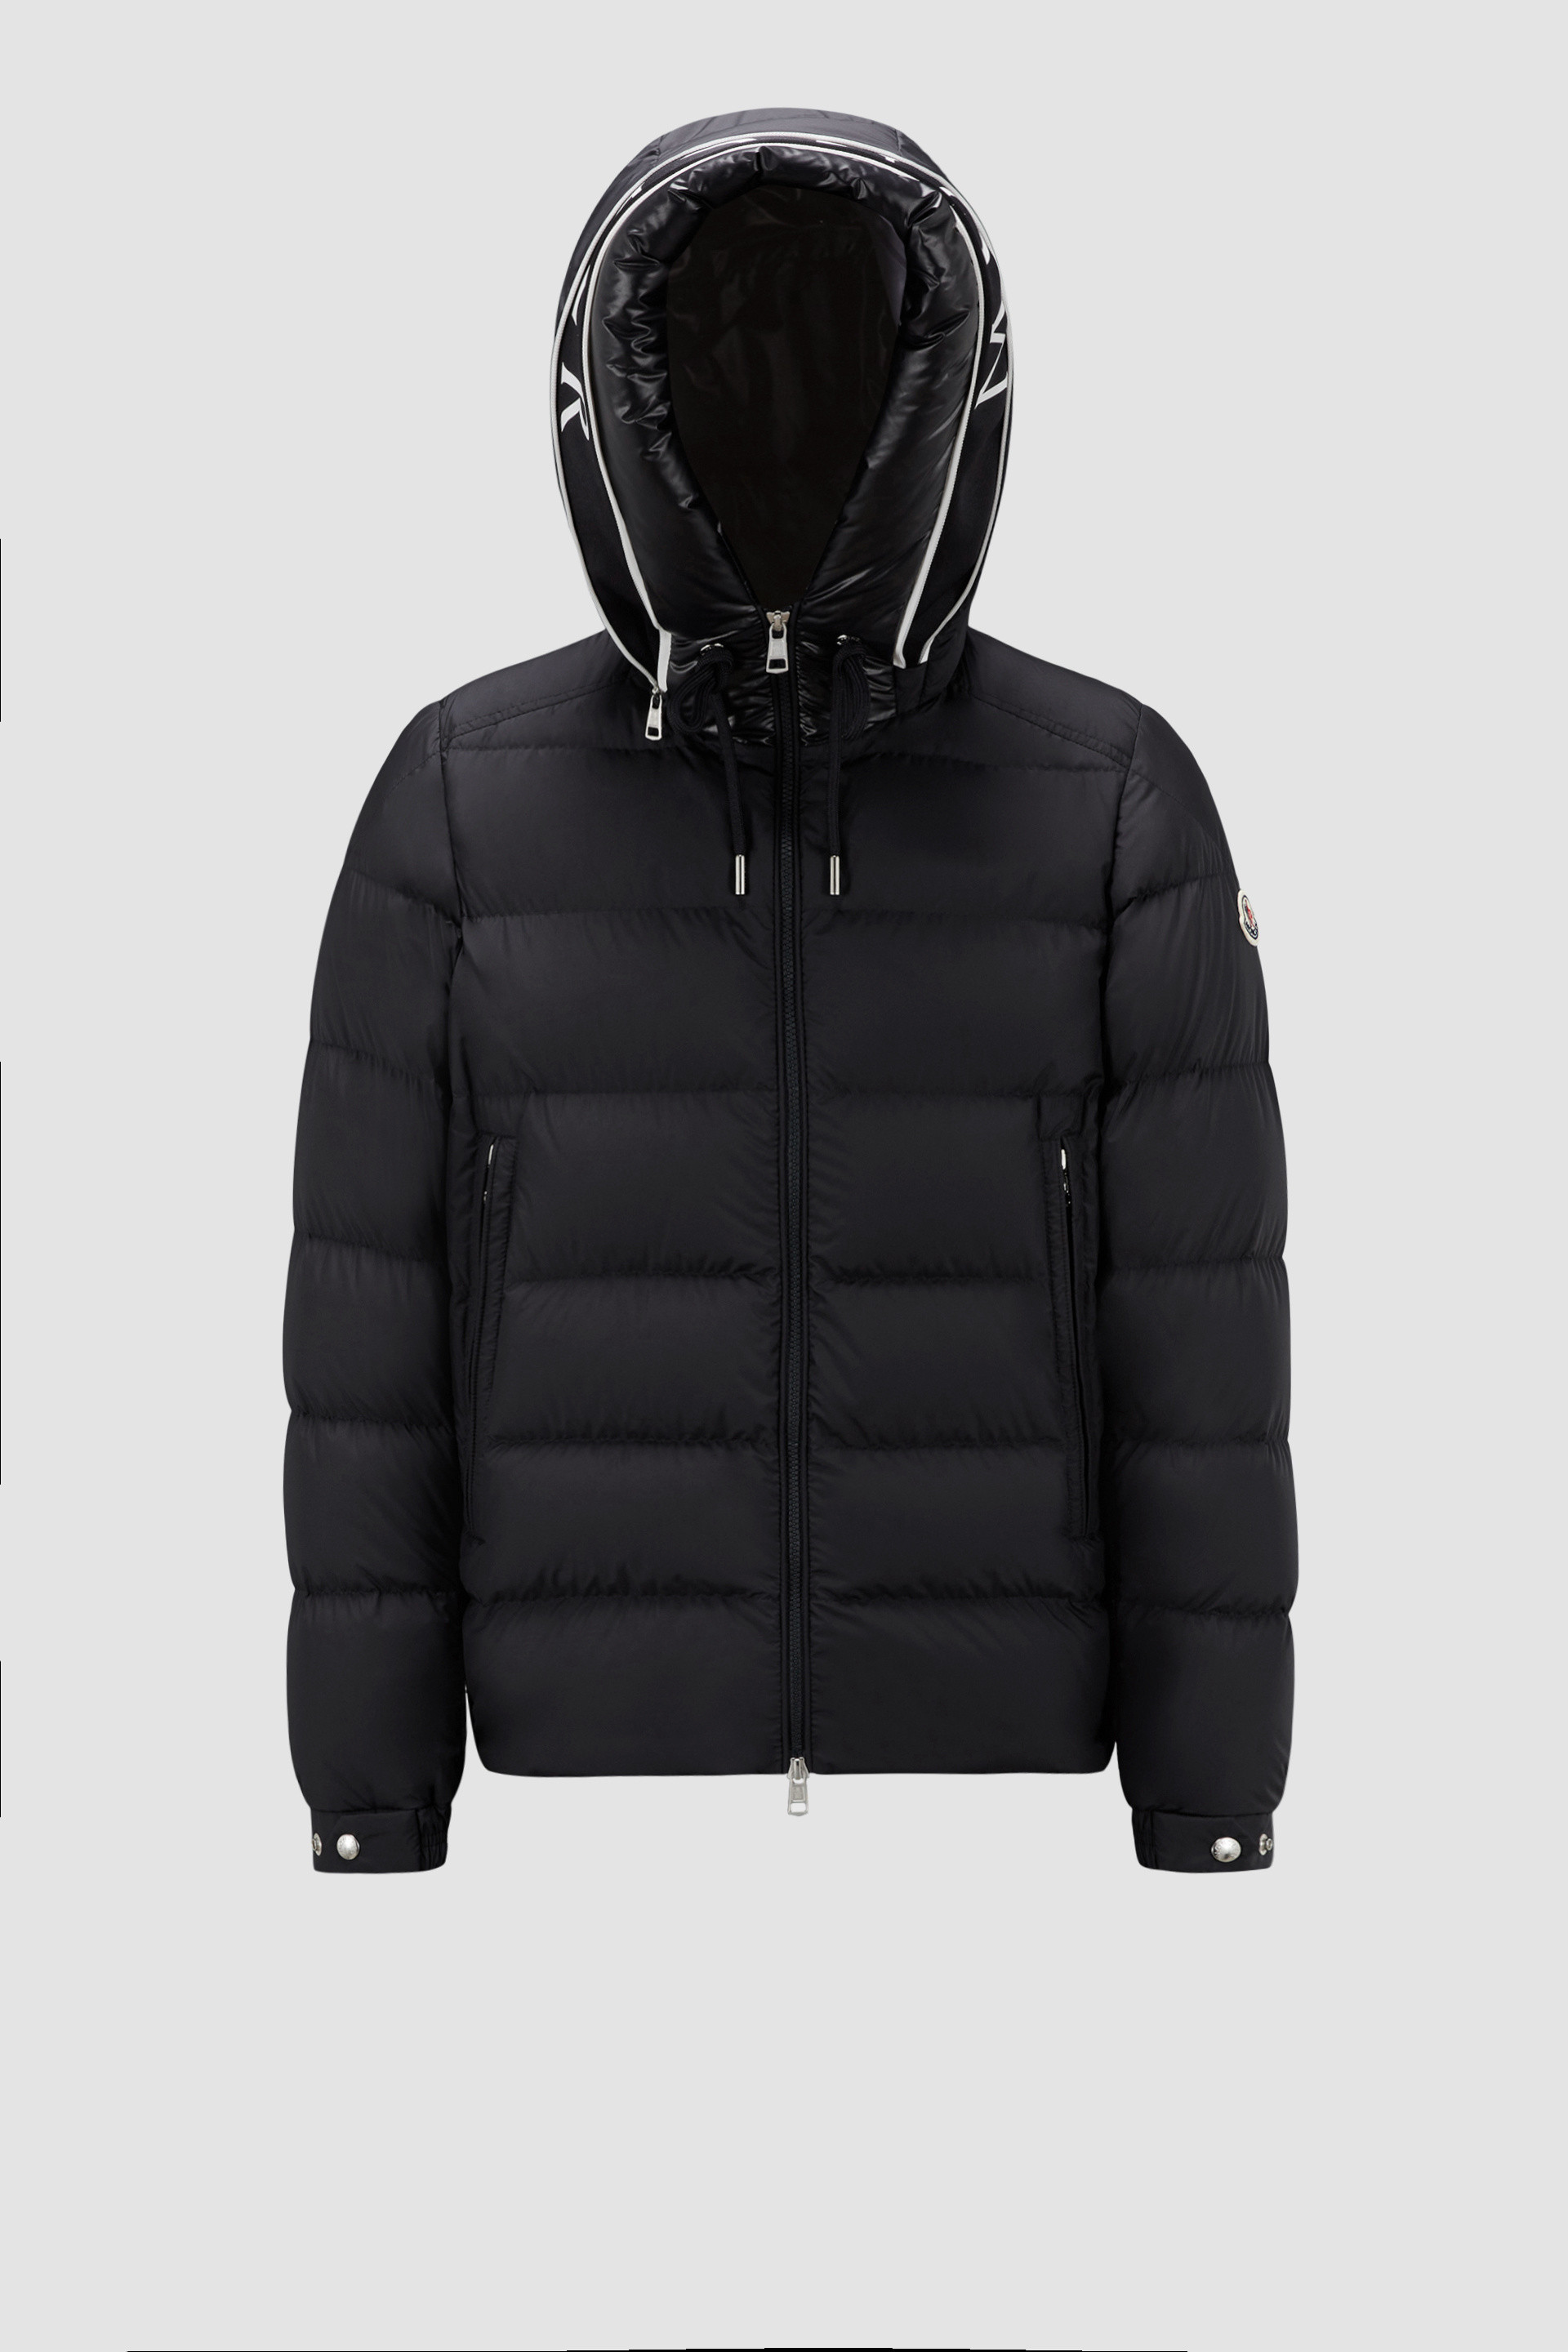 Cardere Short Down Jacket